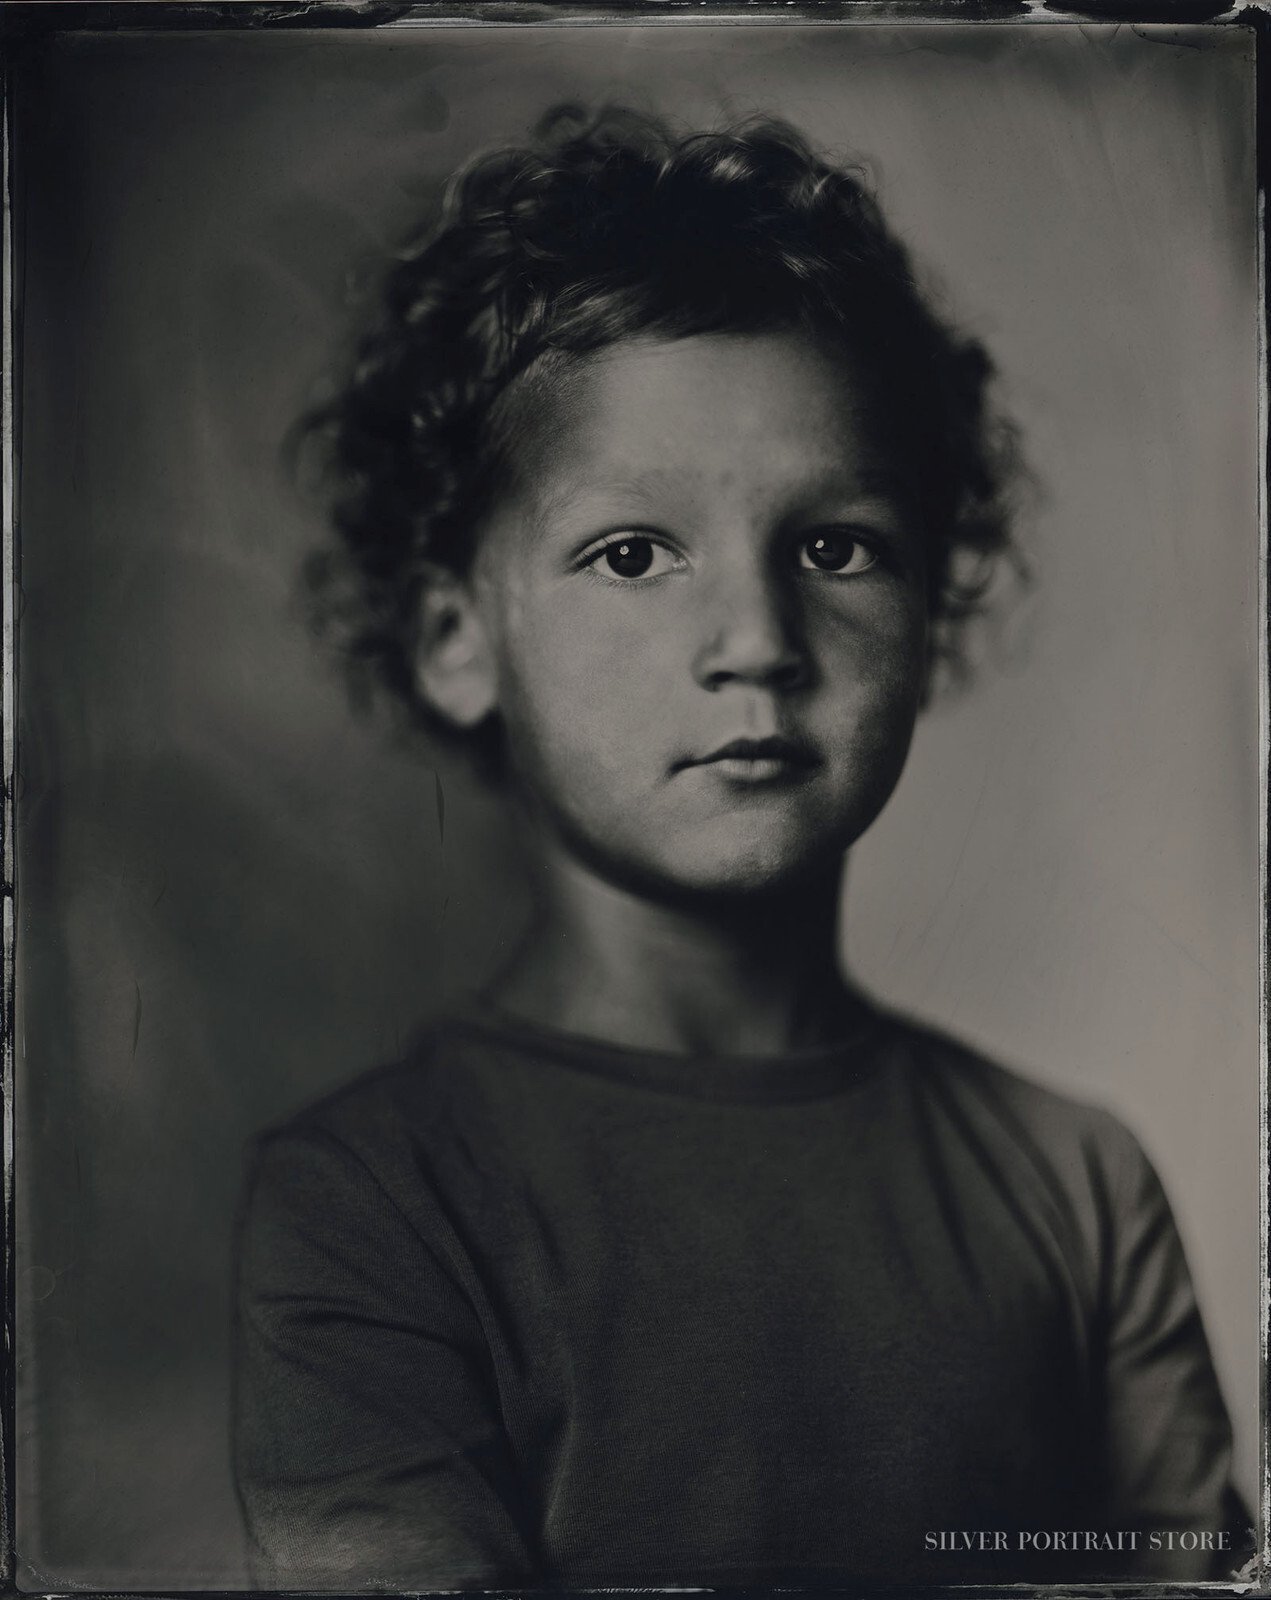 Daan-Silver Portrait Store-scan from Wet plate collodion-Tintype 20 x 25 cm.